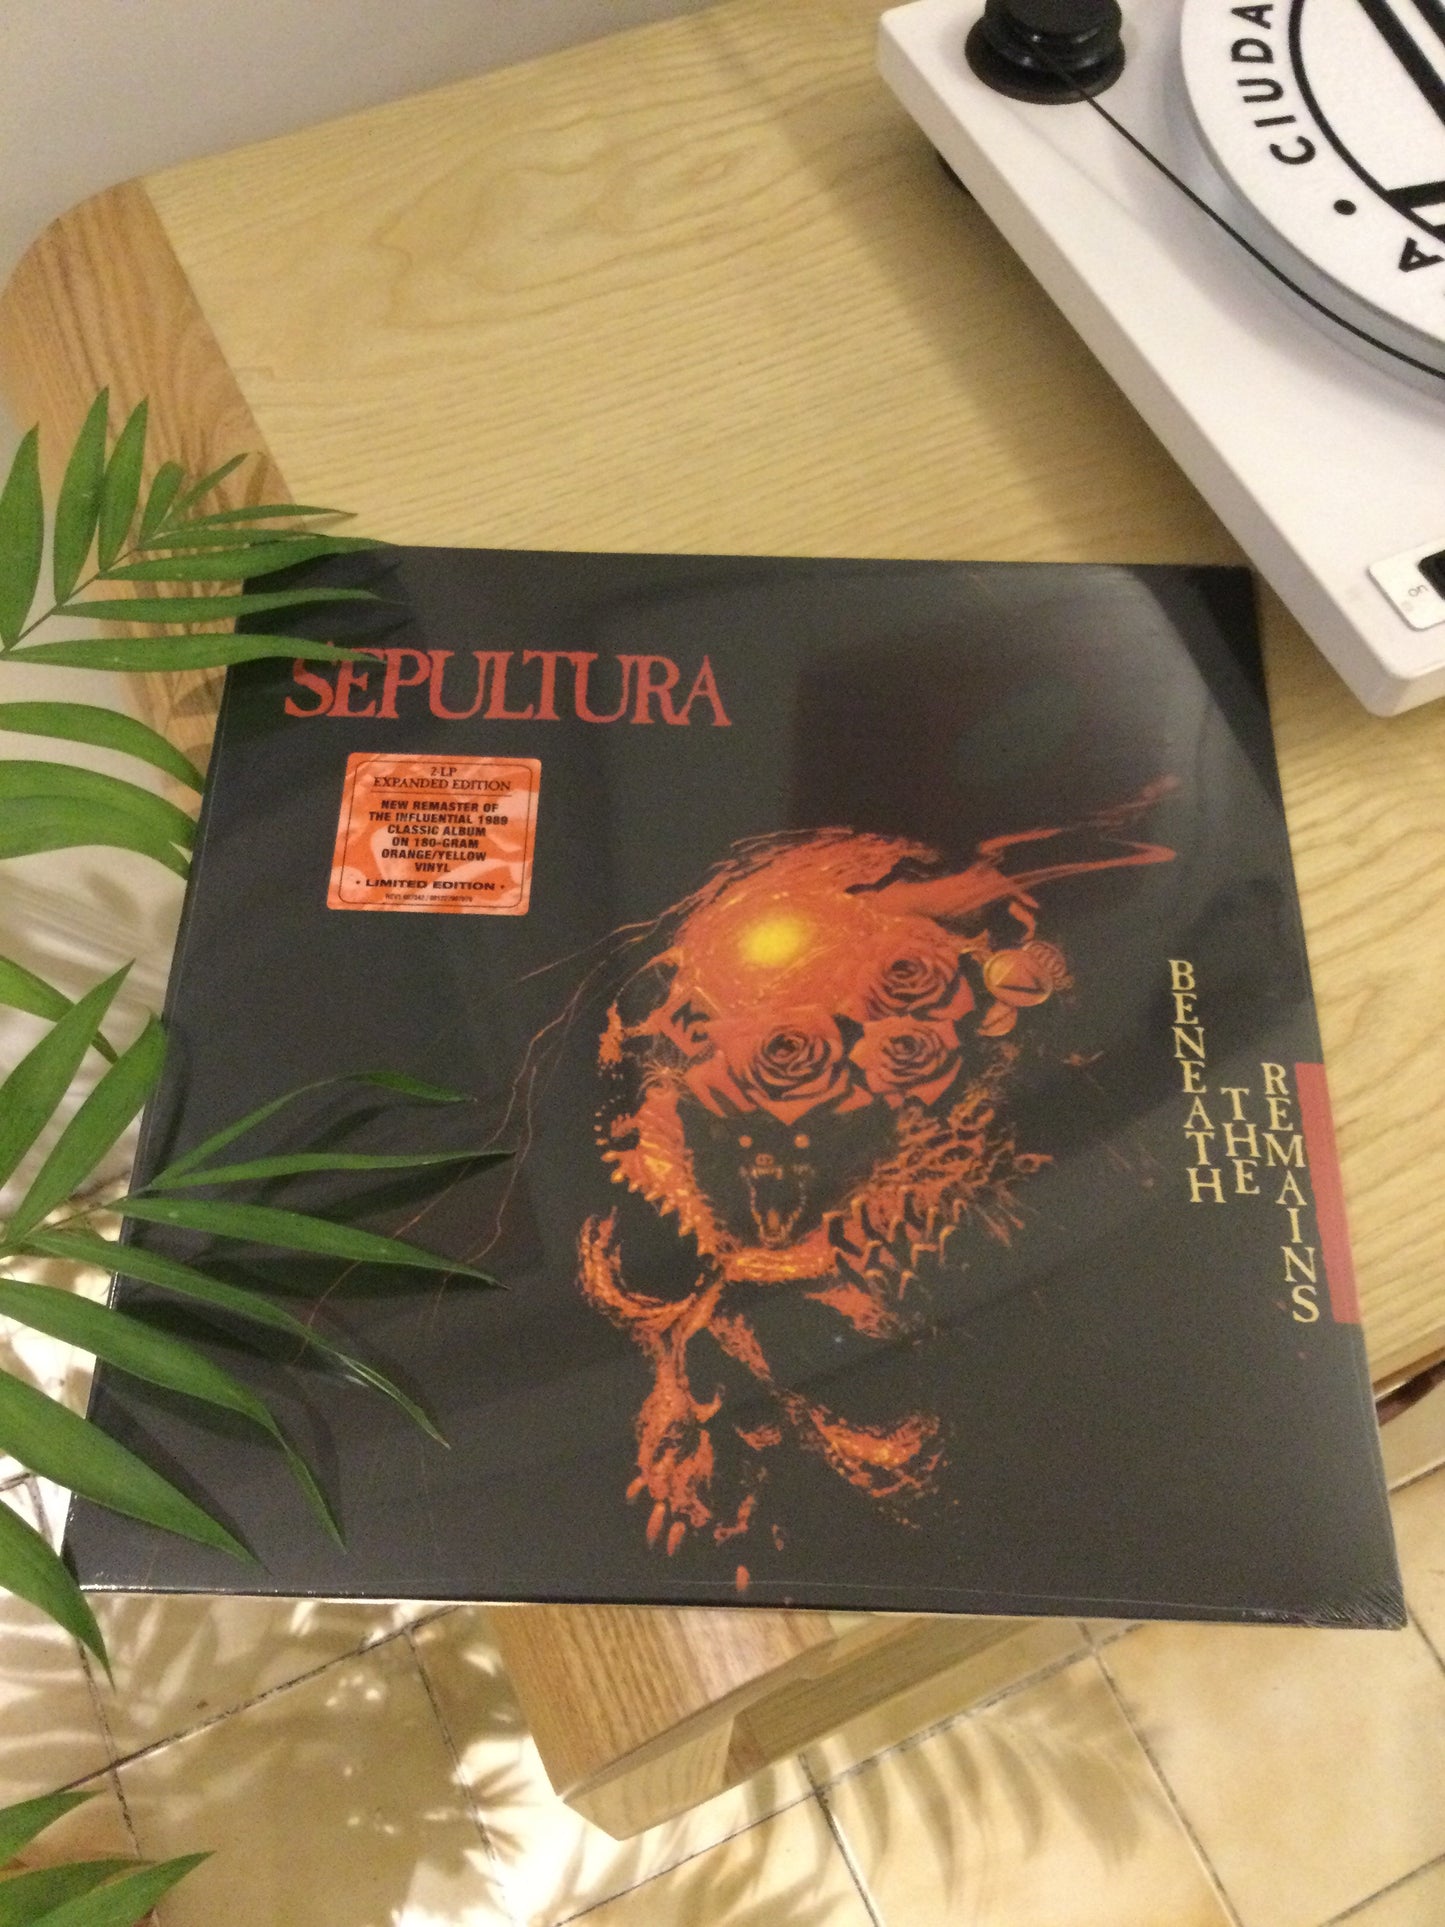 Sepultura - Beneath The Remains(180g, 2xlp expanded, yellow/orange)